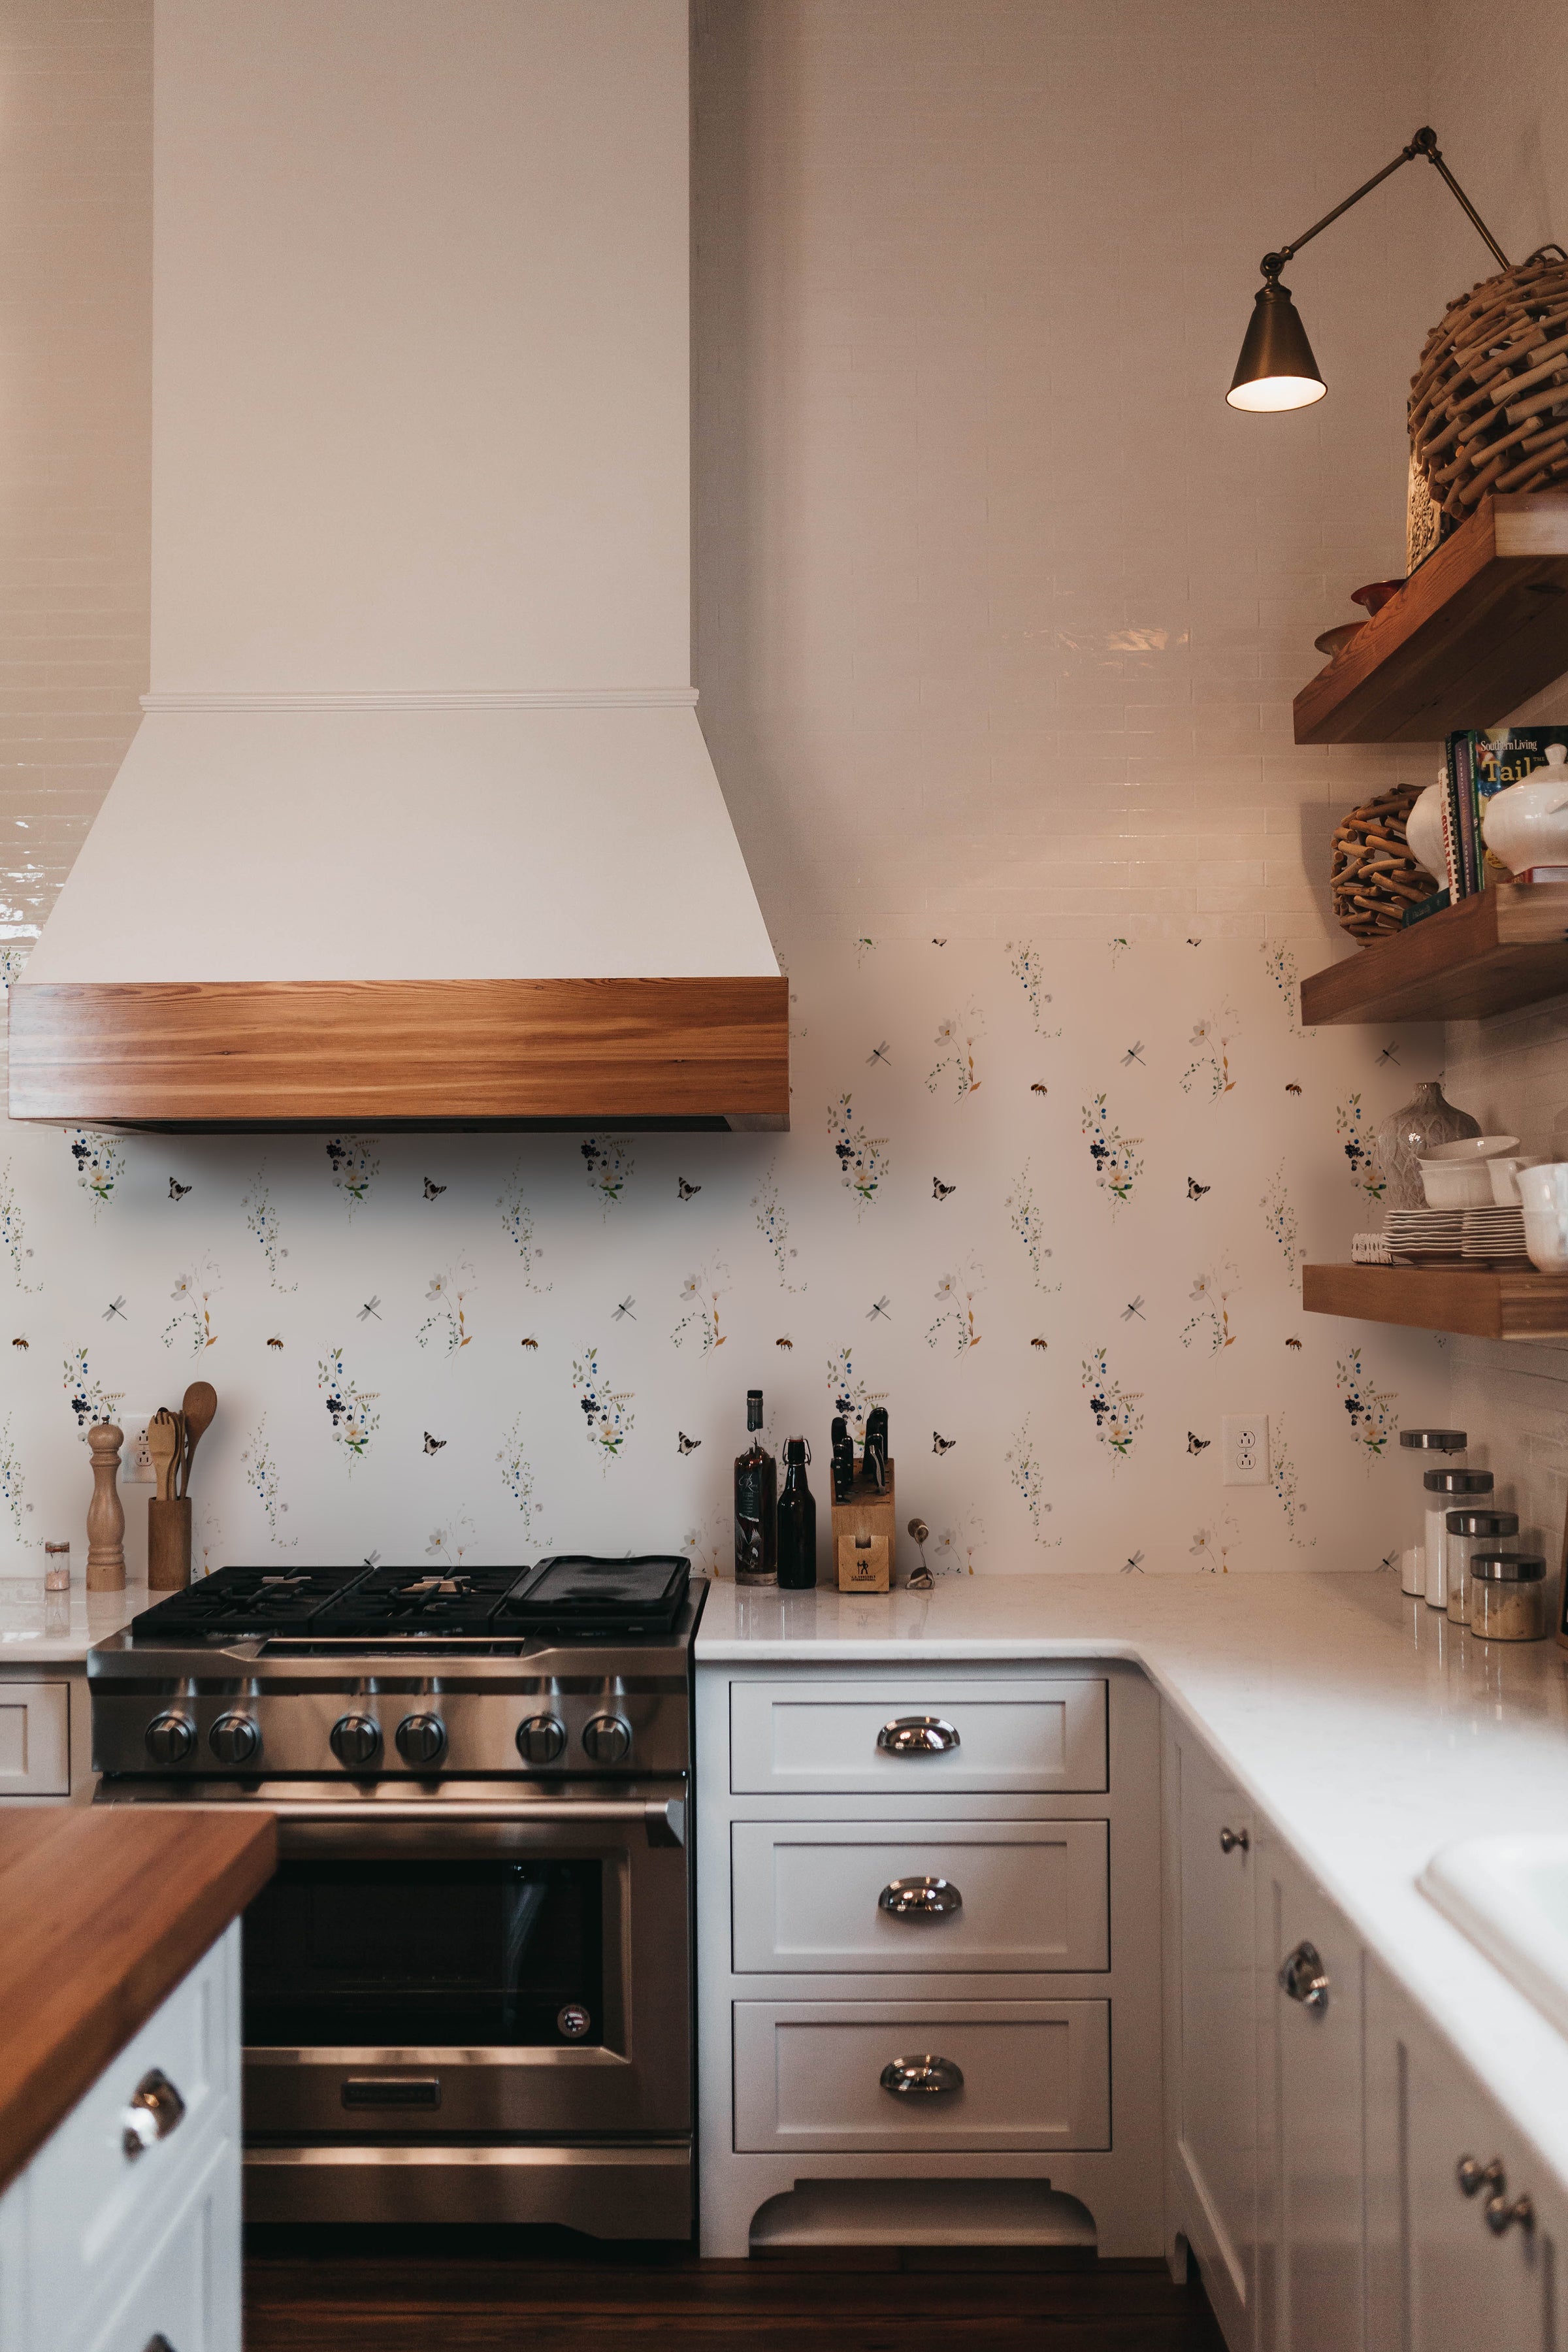 A modern kitchen setup with the "Berry Spring Wallpaper" providing a lively backdrop. The kitchen features sleek cabinetry and a professional-grade stove, with the playful and naturalistic wallpaper pattern adding a touch of whimsy and charm.